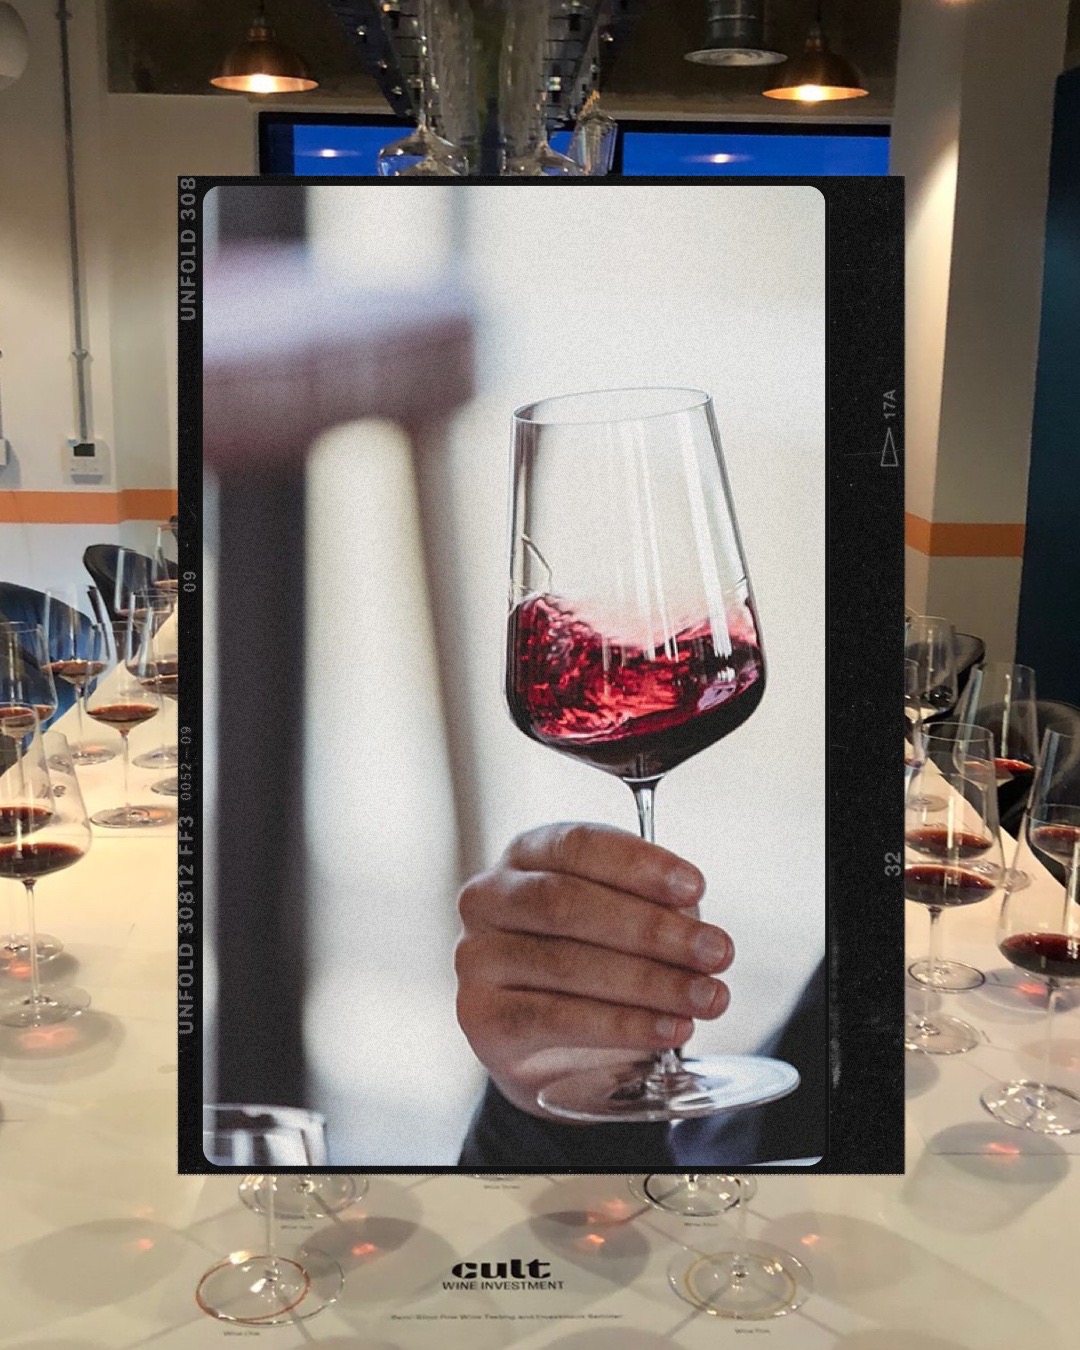 Cult Wines Americas – The Future of Fine Wine Investment [Part 1]